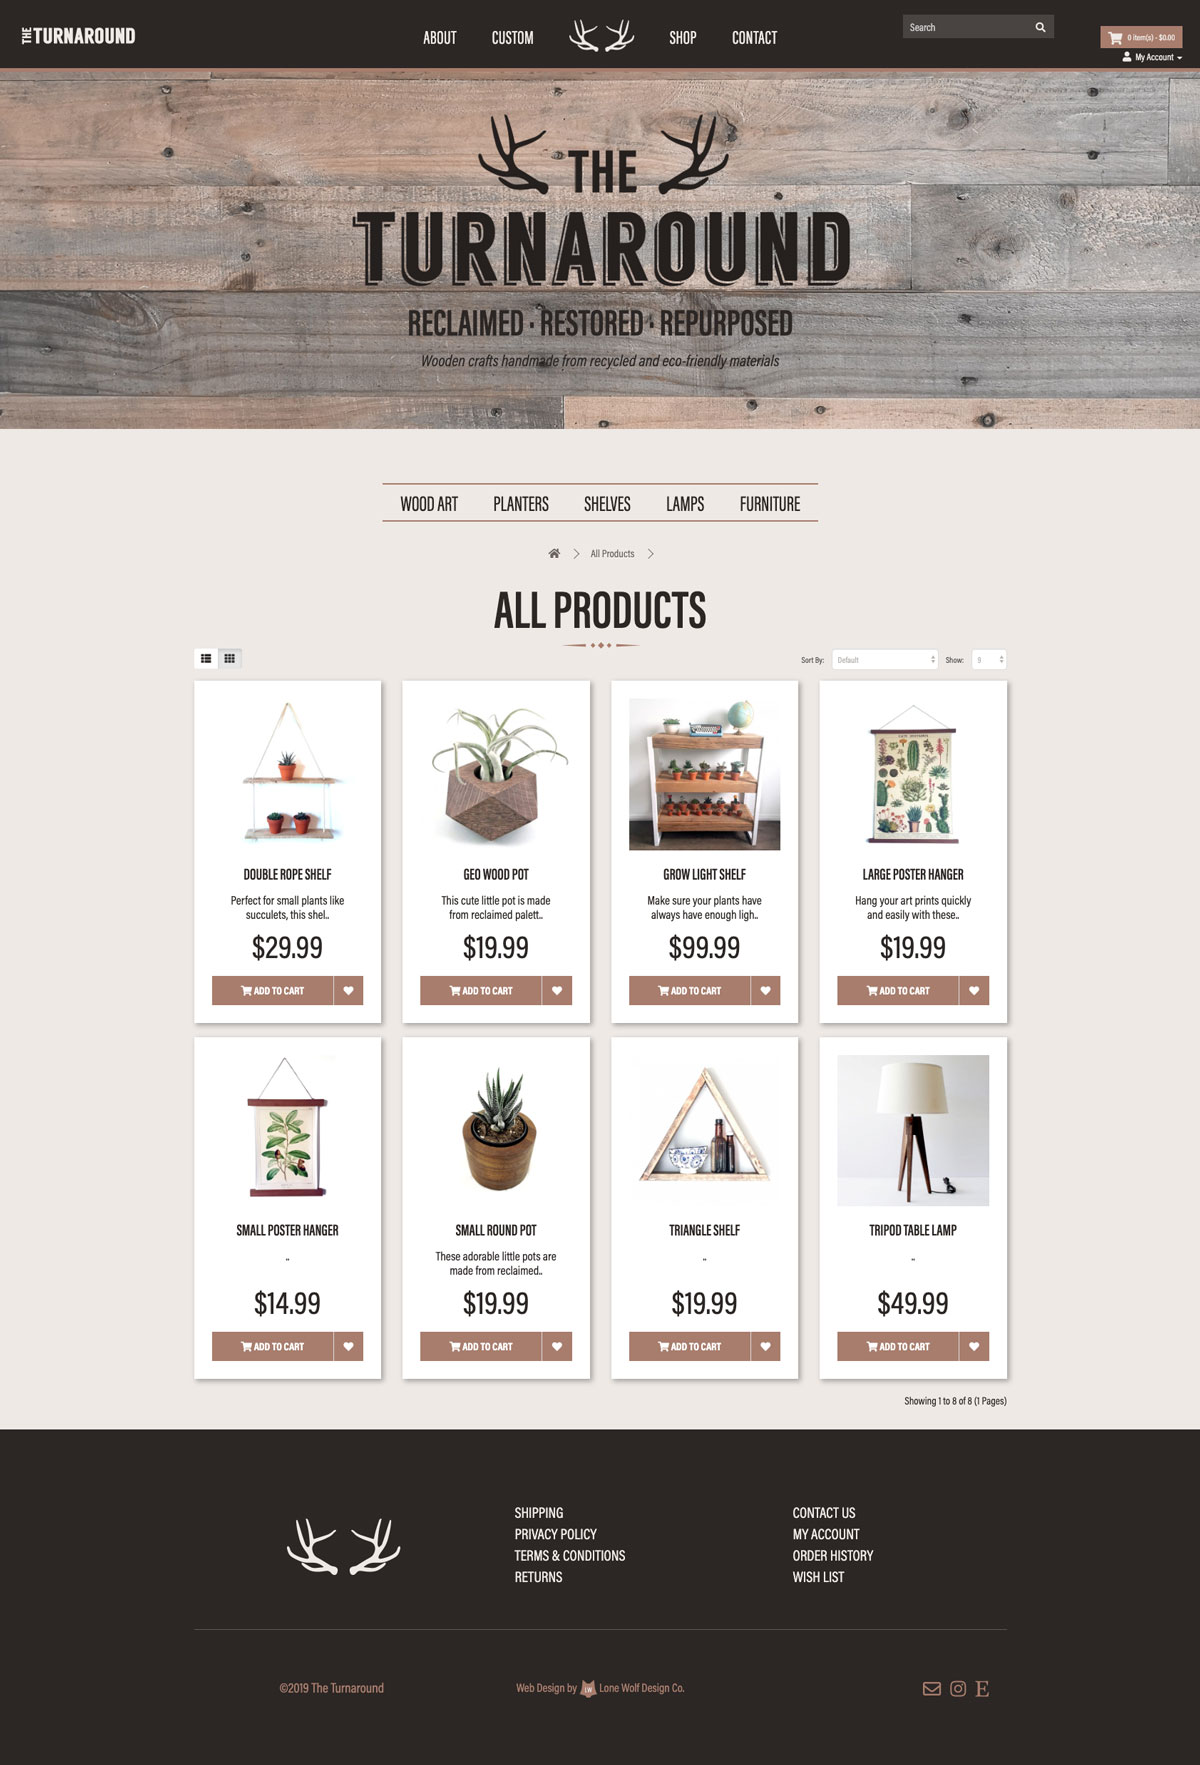 The Turnaround Product Page Design